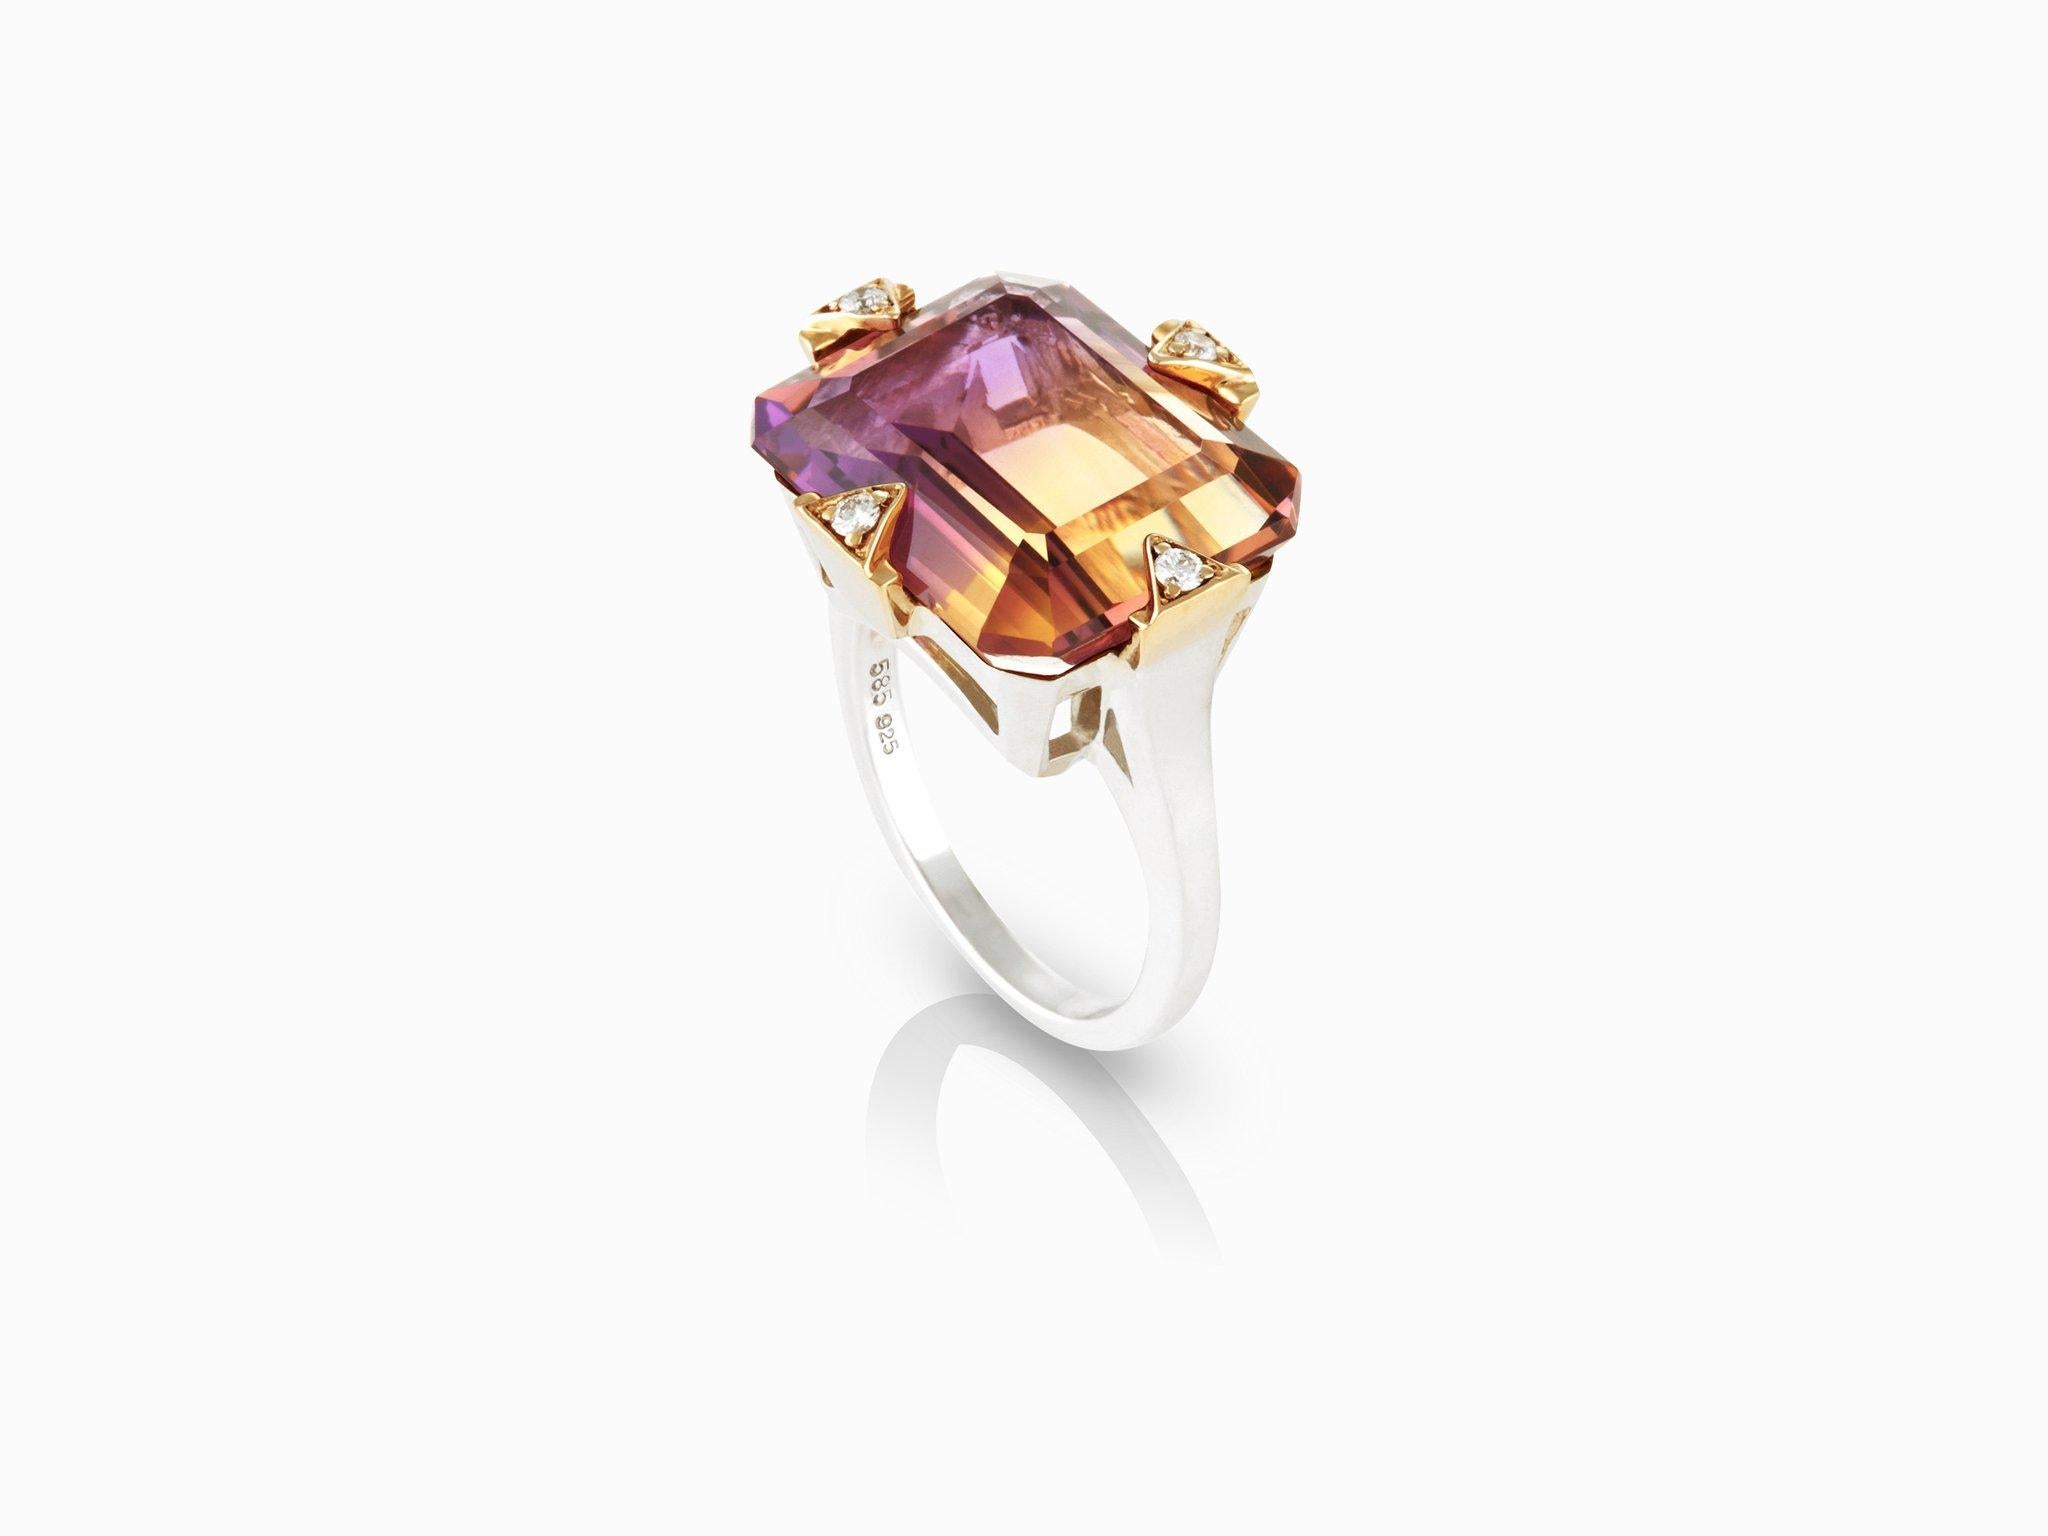 MANIAMANIA Manifest Cocktail ring with a Sterling silver band, set with a custom emerald cut Ametrine gemstone (14.5mm x 17.5mm) in 14k yellow gold prong setting with white Diamond details. Size 7.25.

This statement mixed metal cocktail ring was